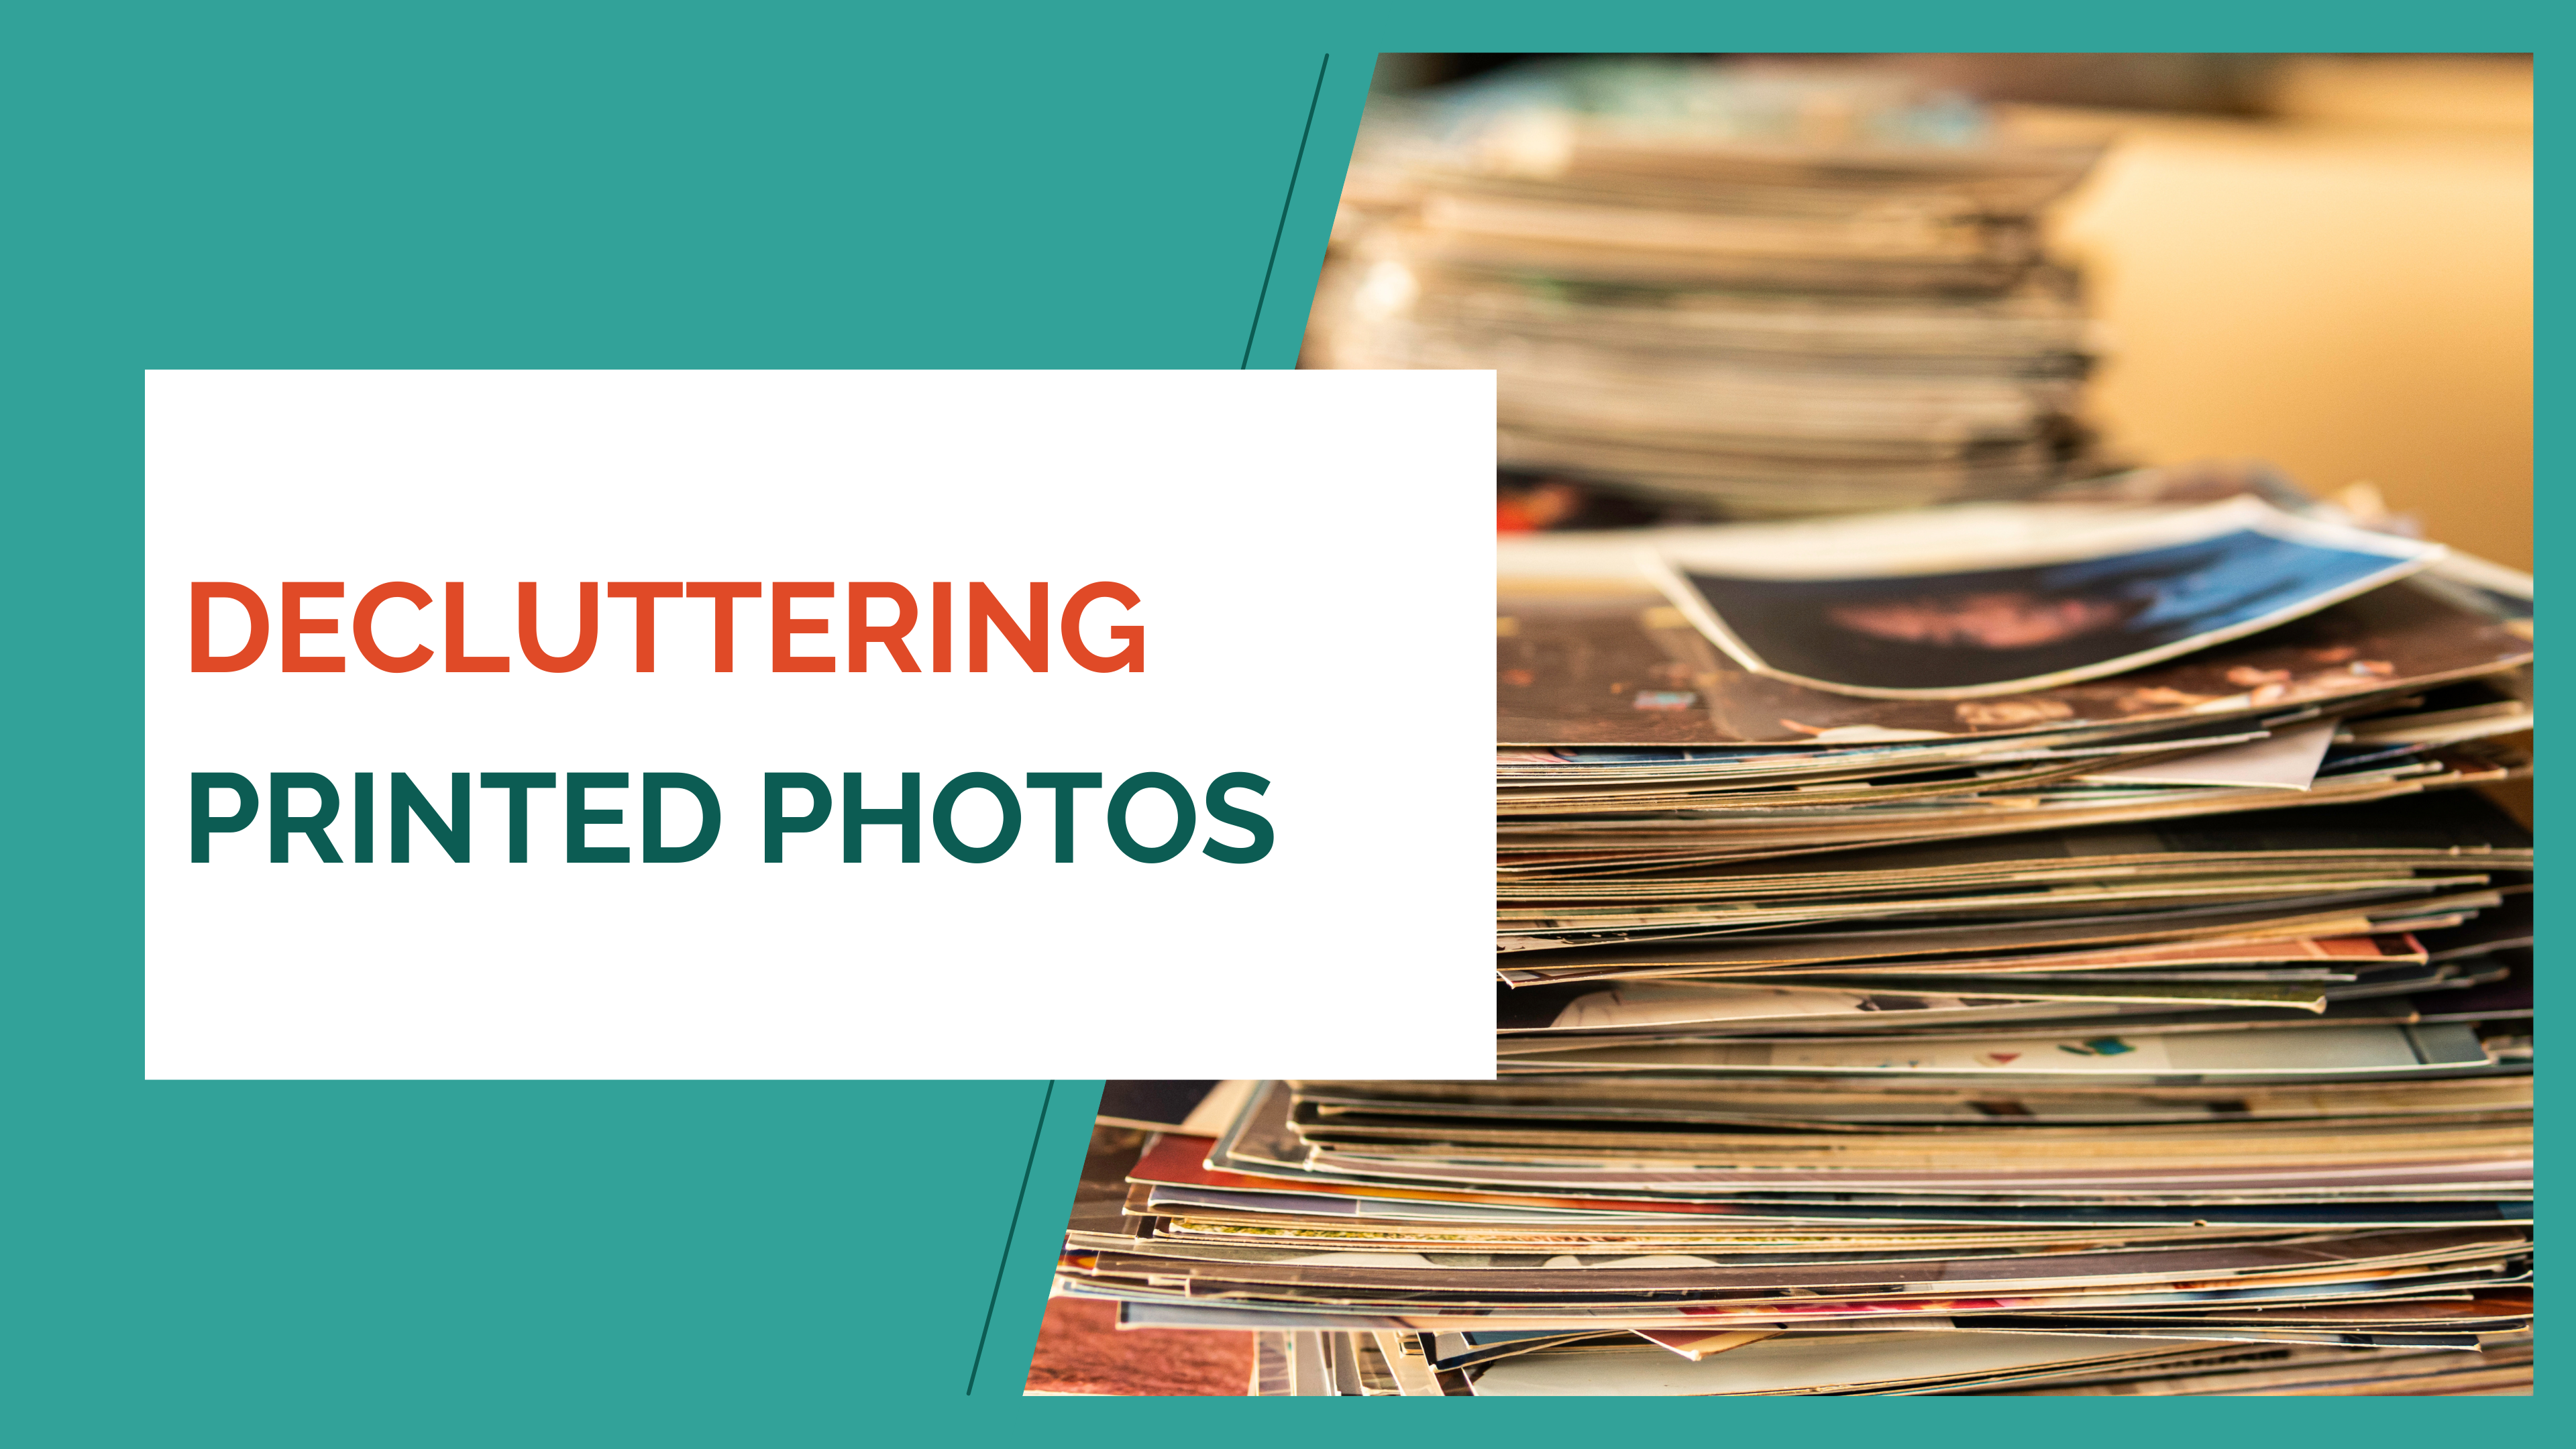 Decluttering printed photos